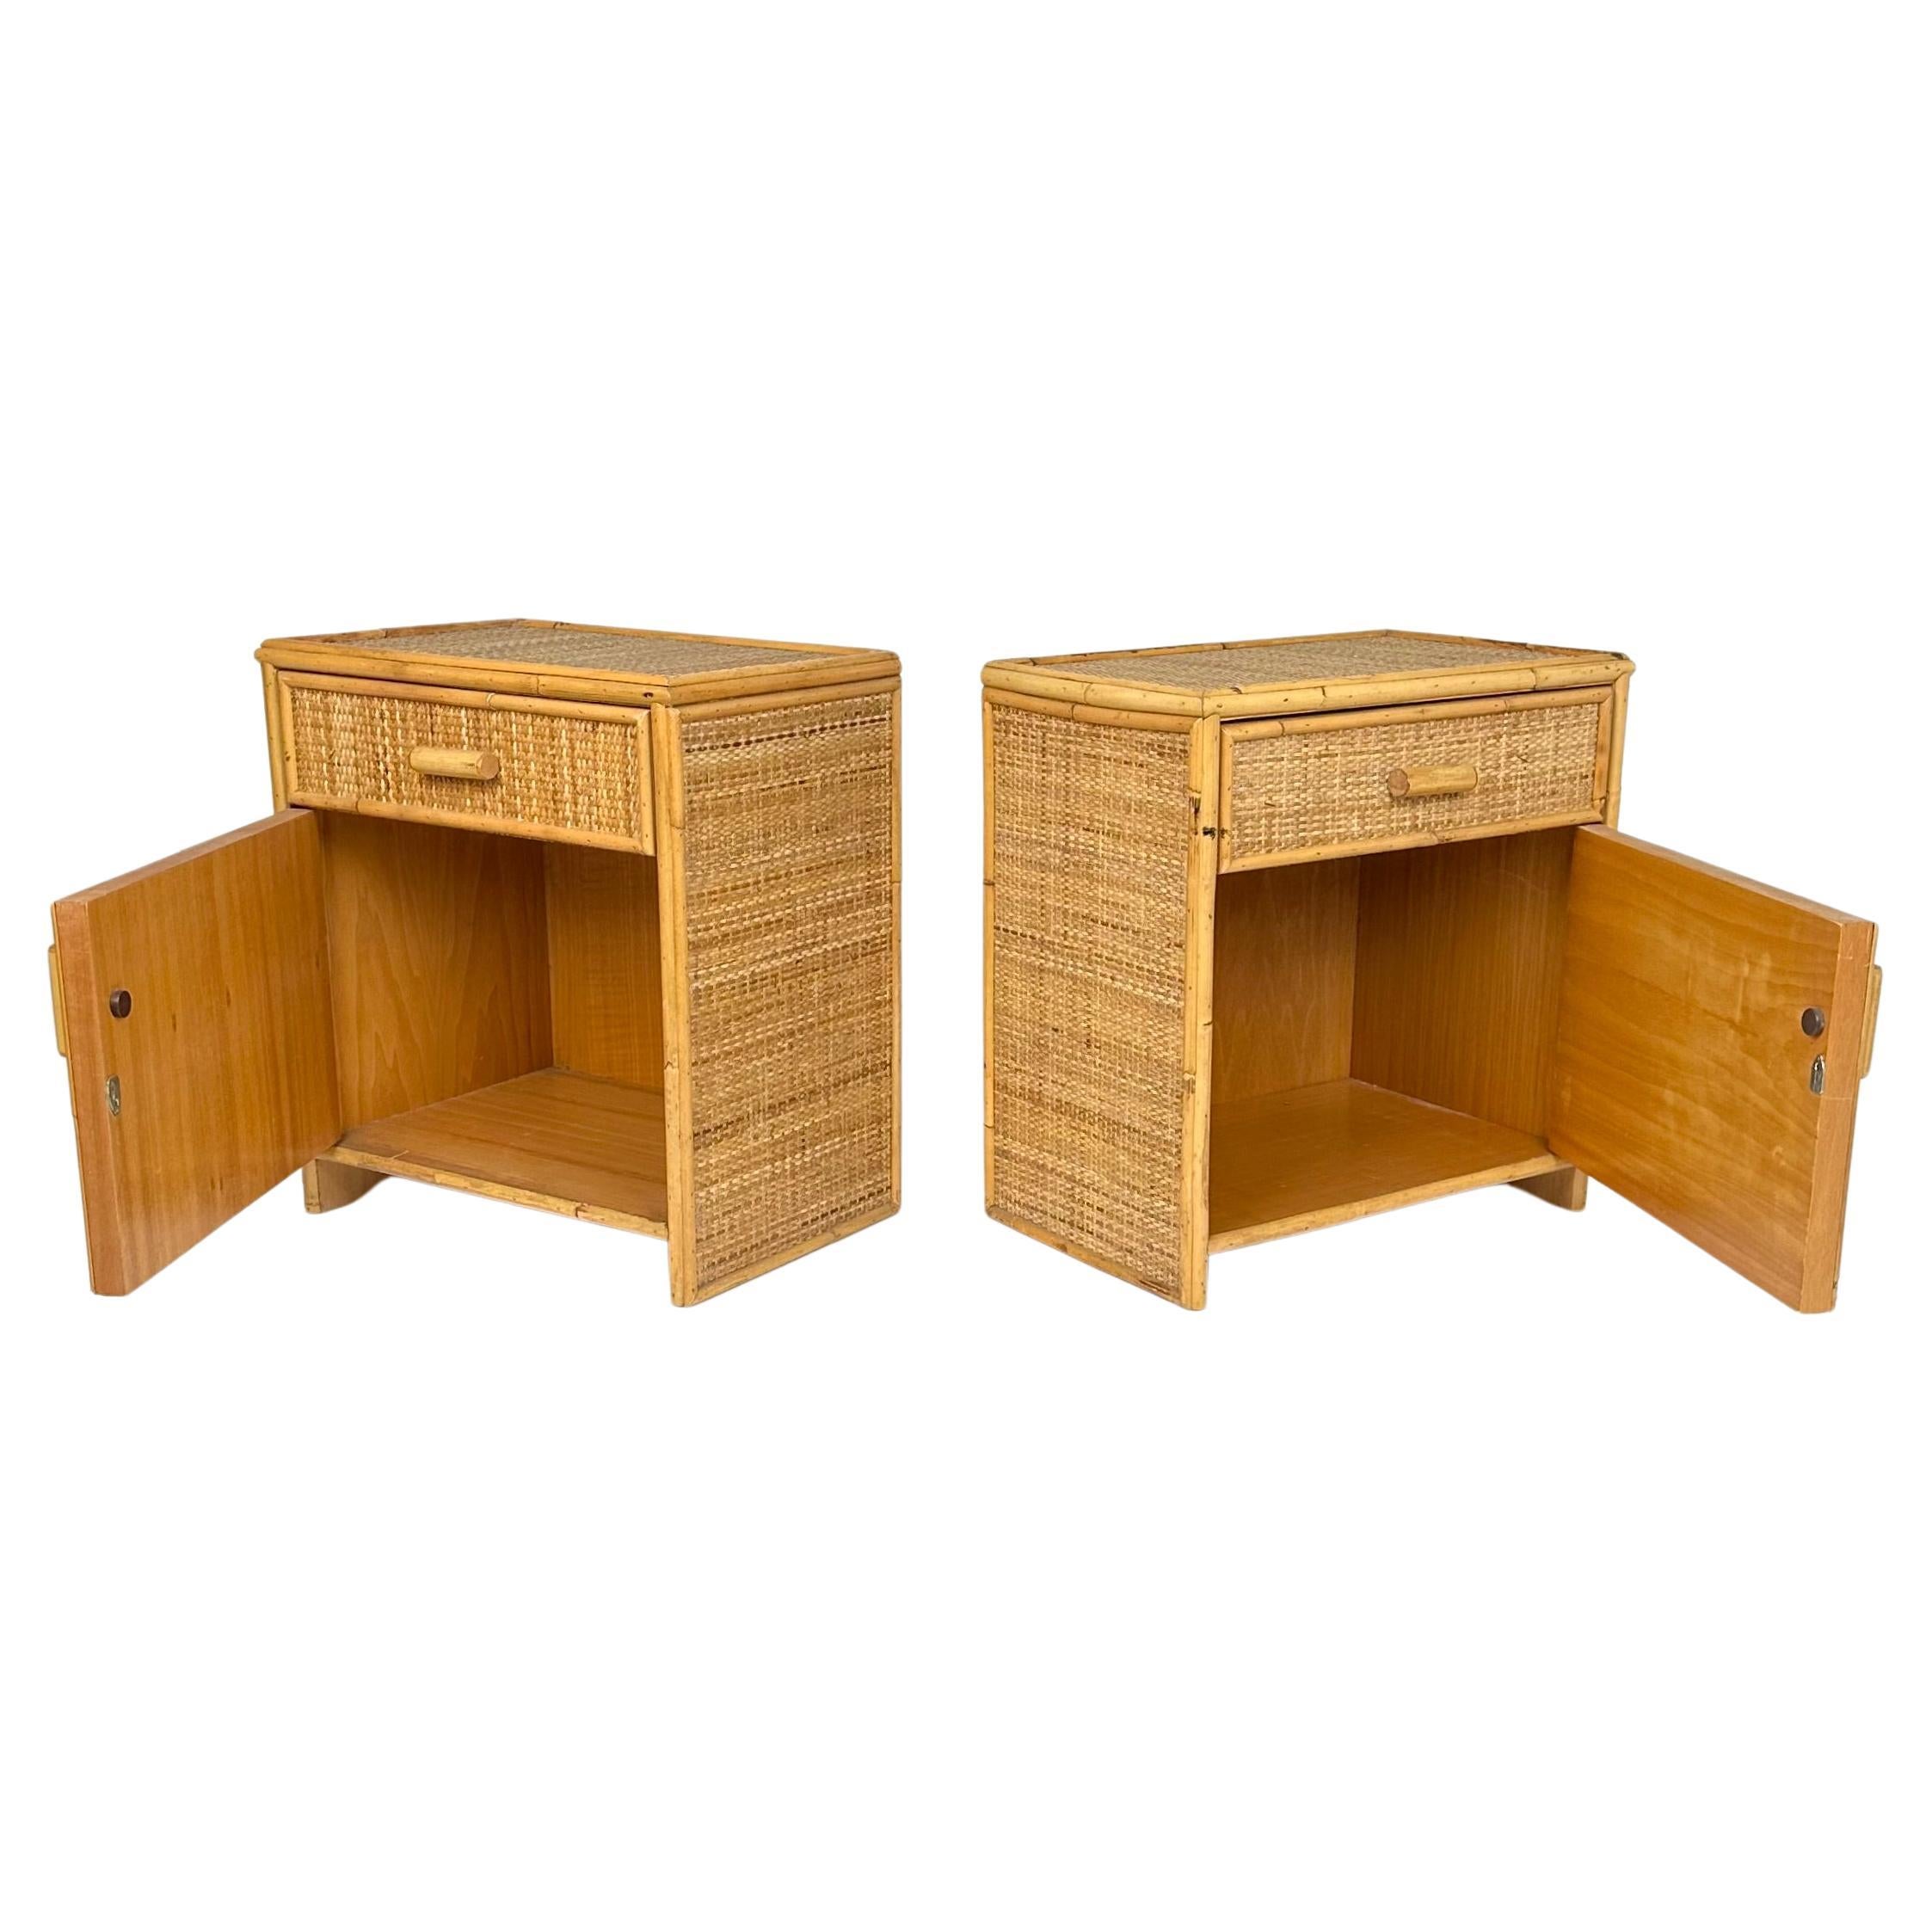 Late 20th Century Midcentury Pair of Bedside Tables Nightstands in Bamboo & Rattan, Italy 1970s For Sale